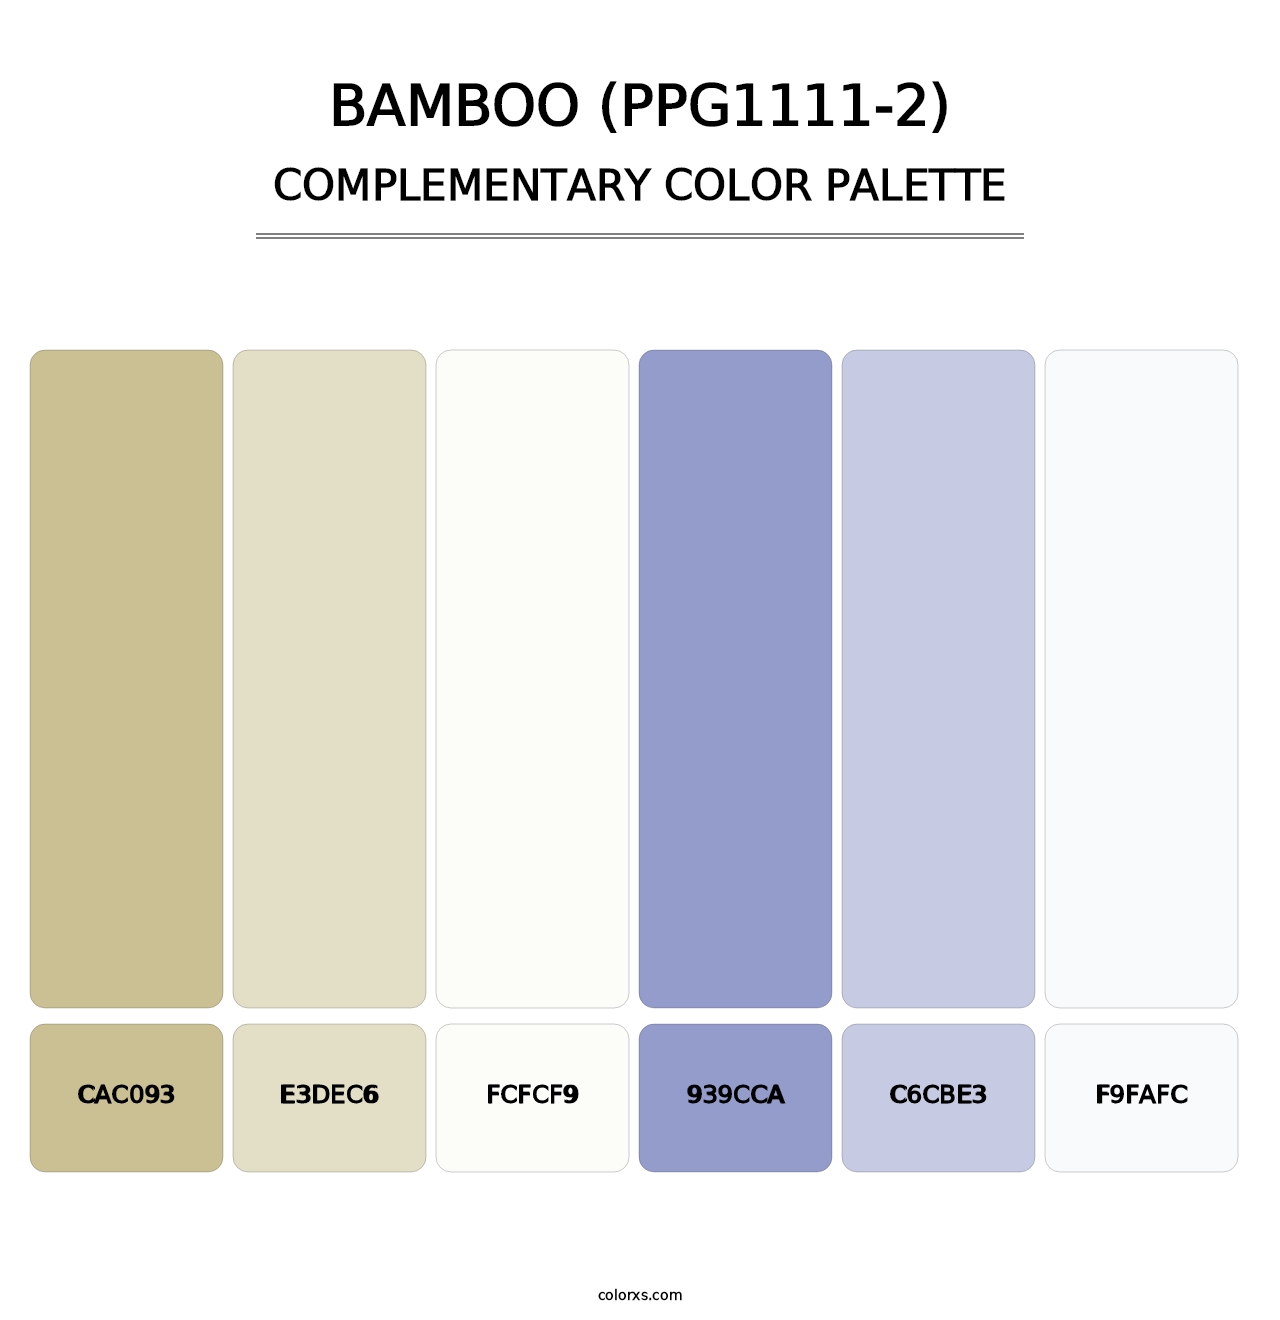 Bamboo (PPG1111-2) - Complementary Color Palette